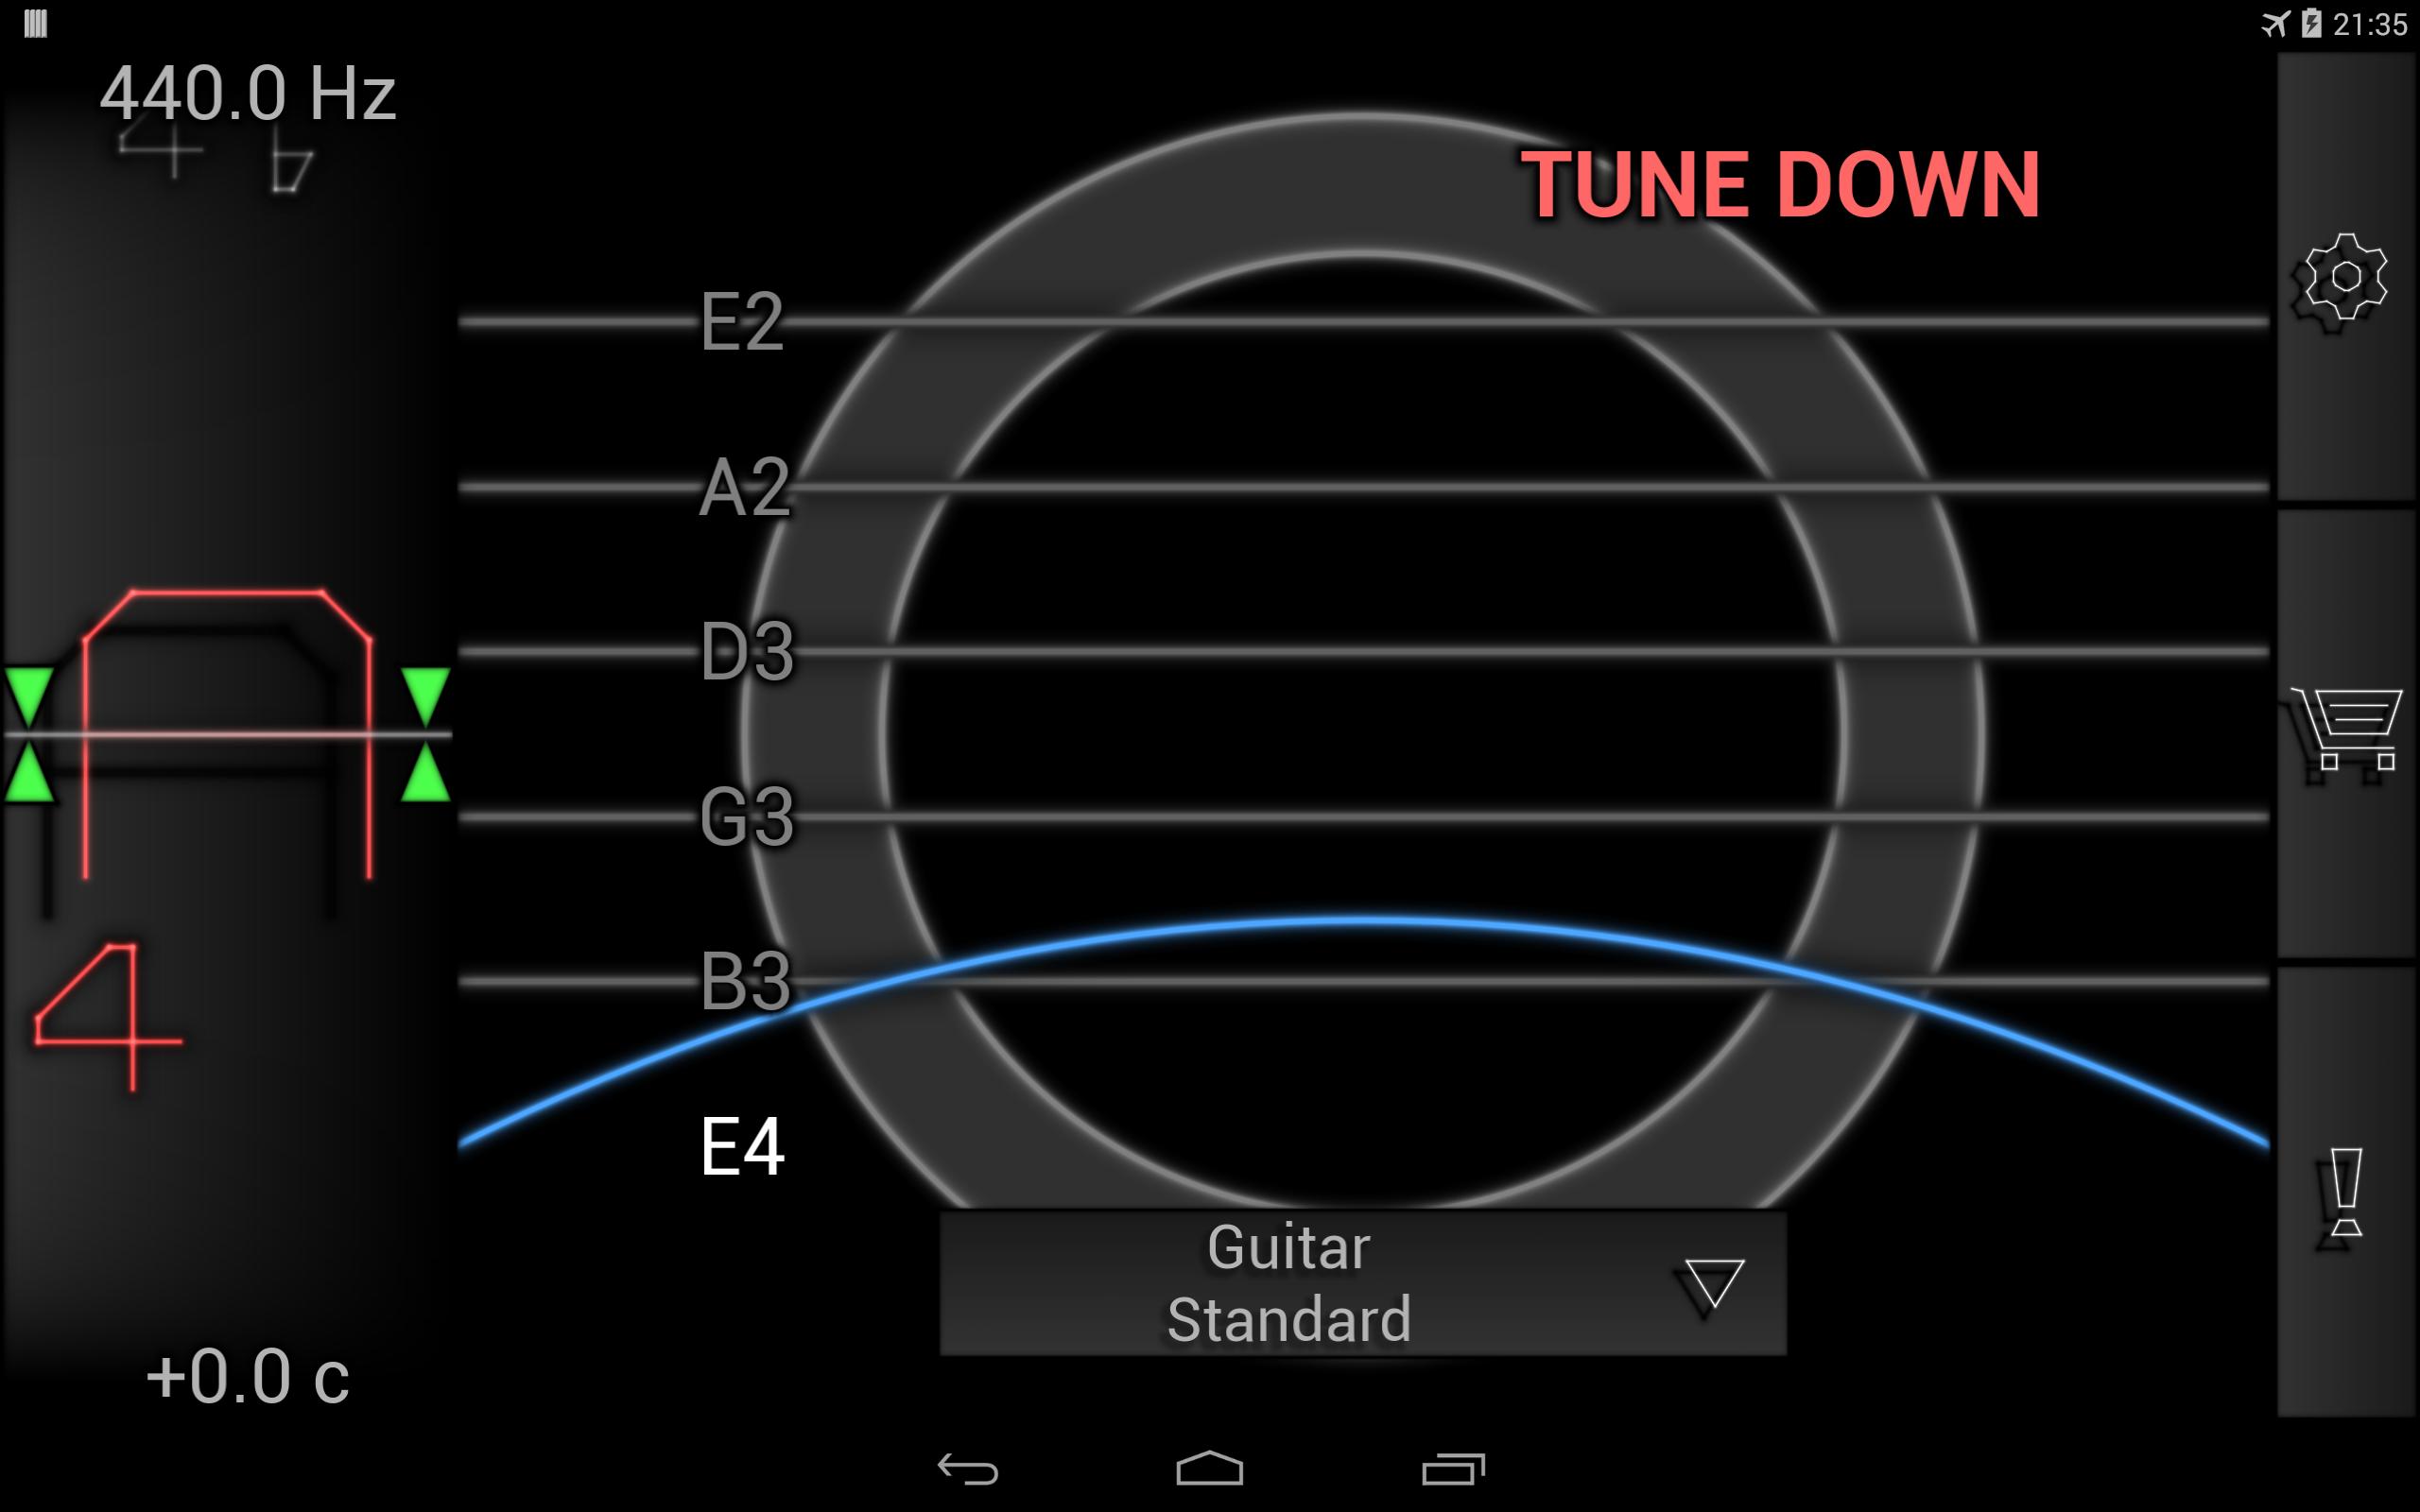 PitchLab Guitar Tuner (PRO) for Android - APK Download